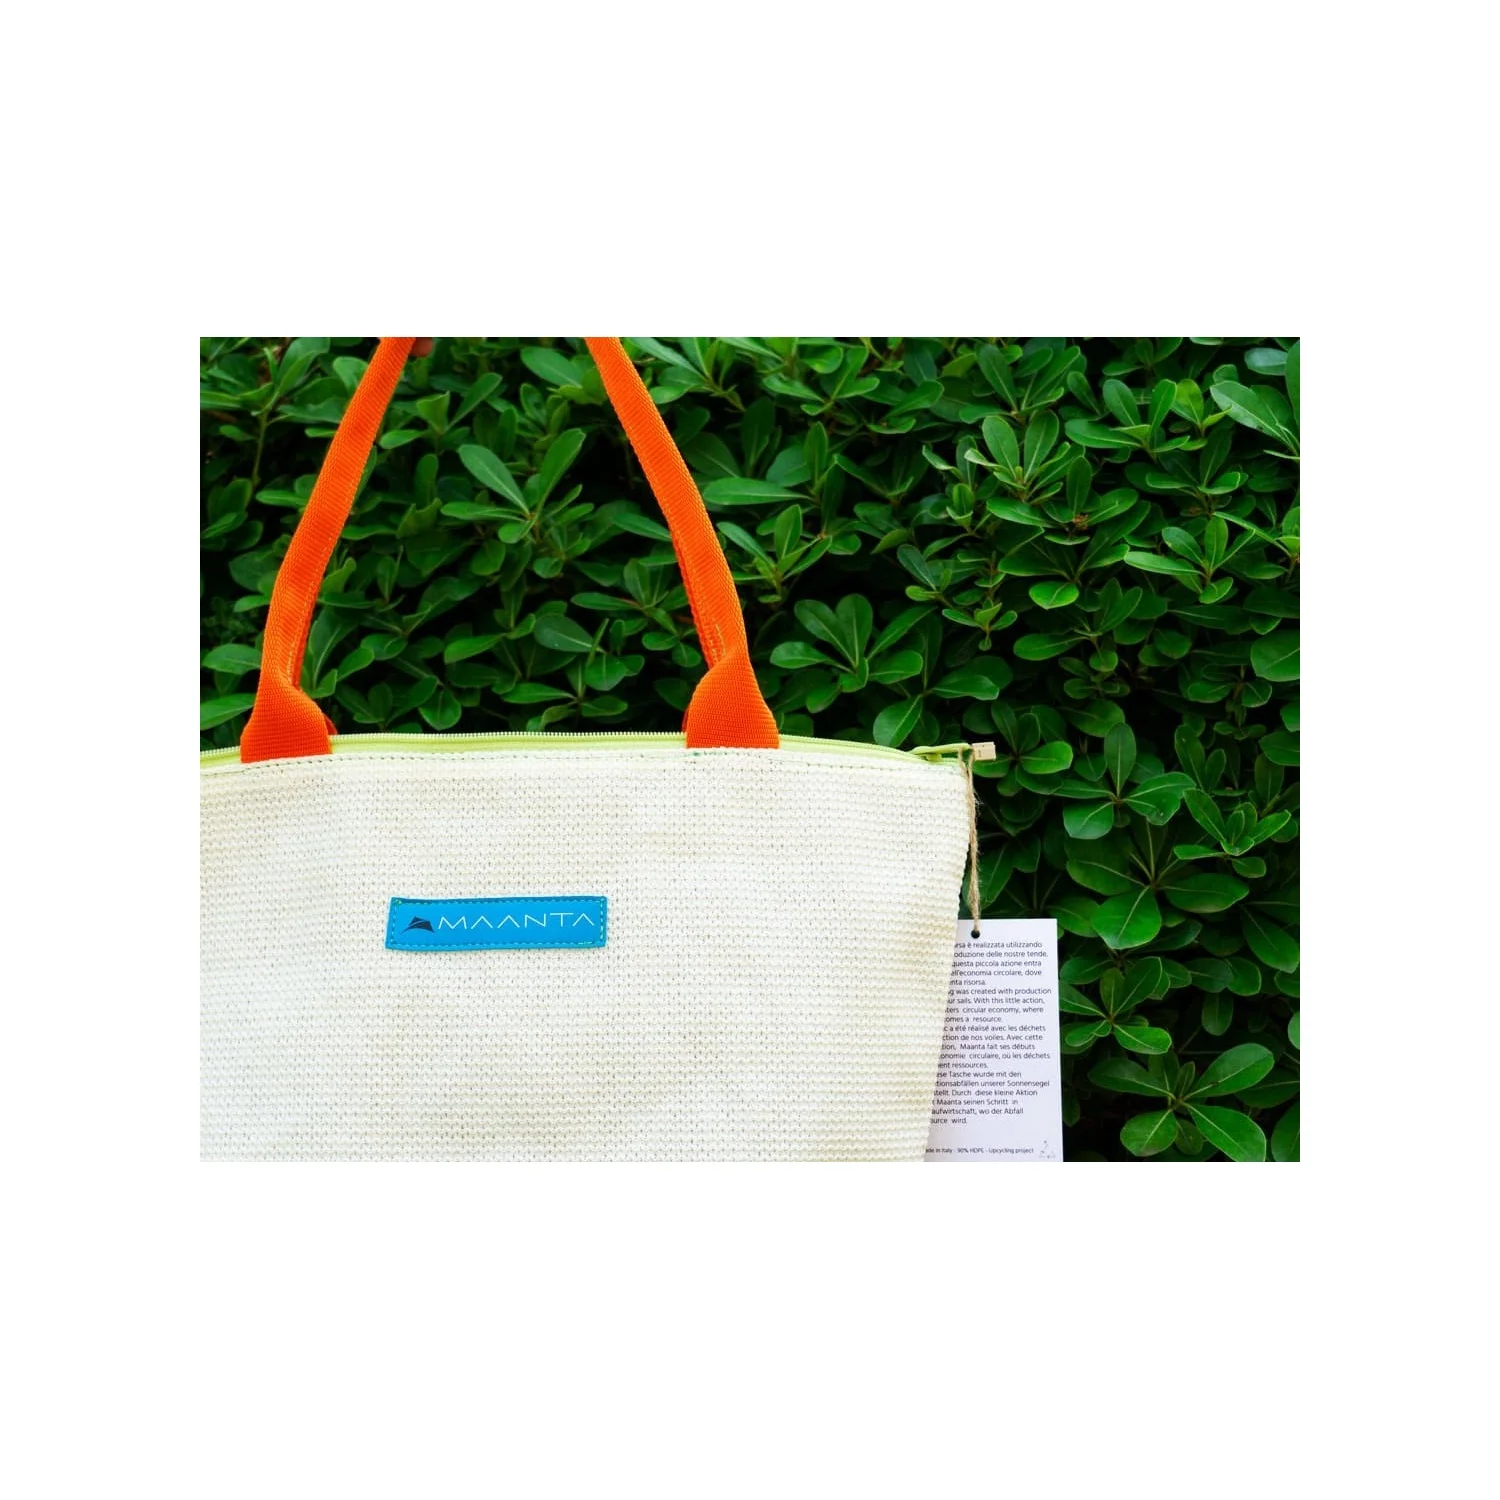 Risacca Per  Outlet: The Path recycle bag - Brown  Risacca Per   tote bags THE PATH online at